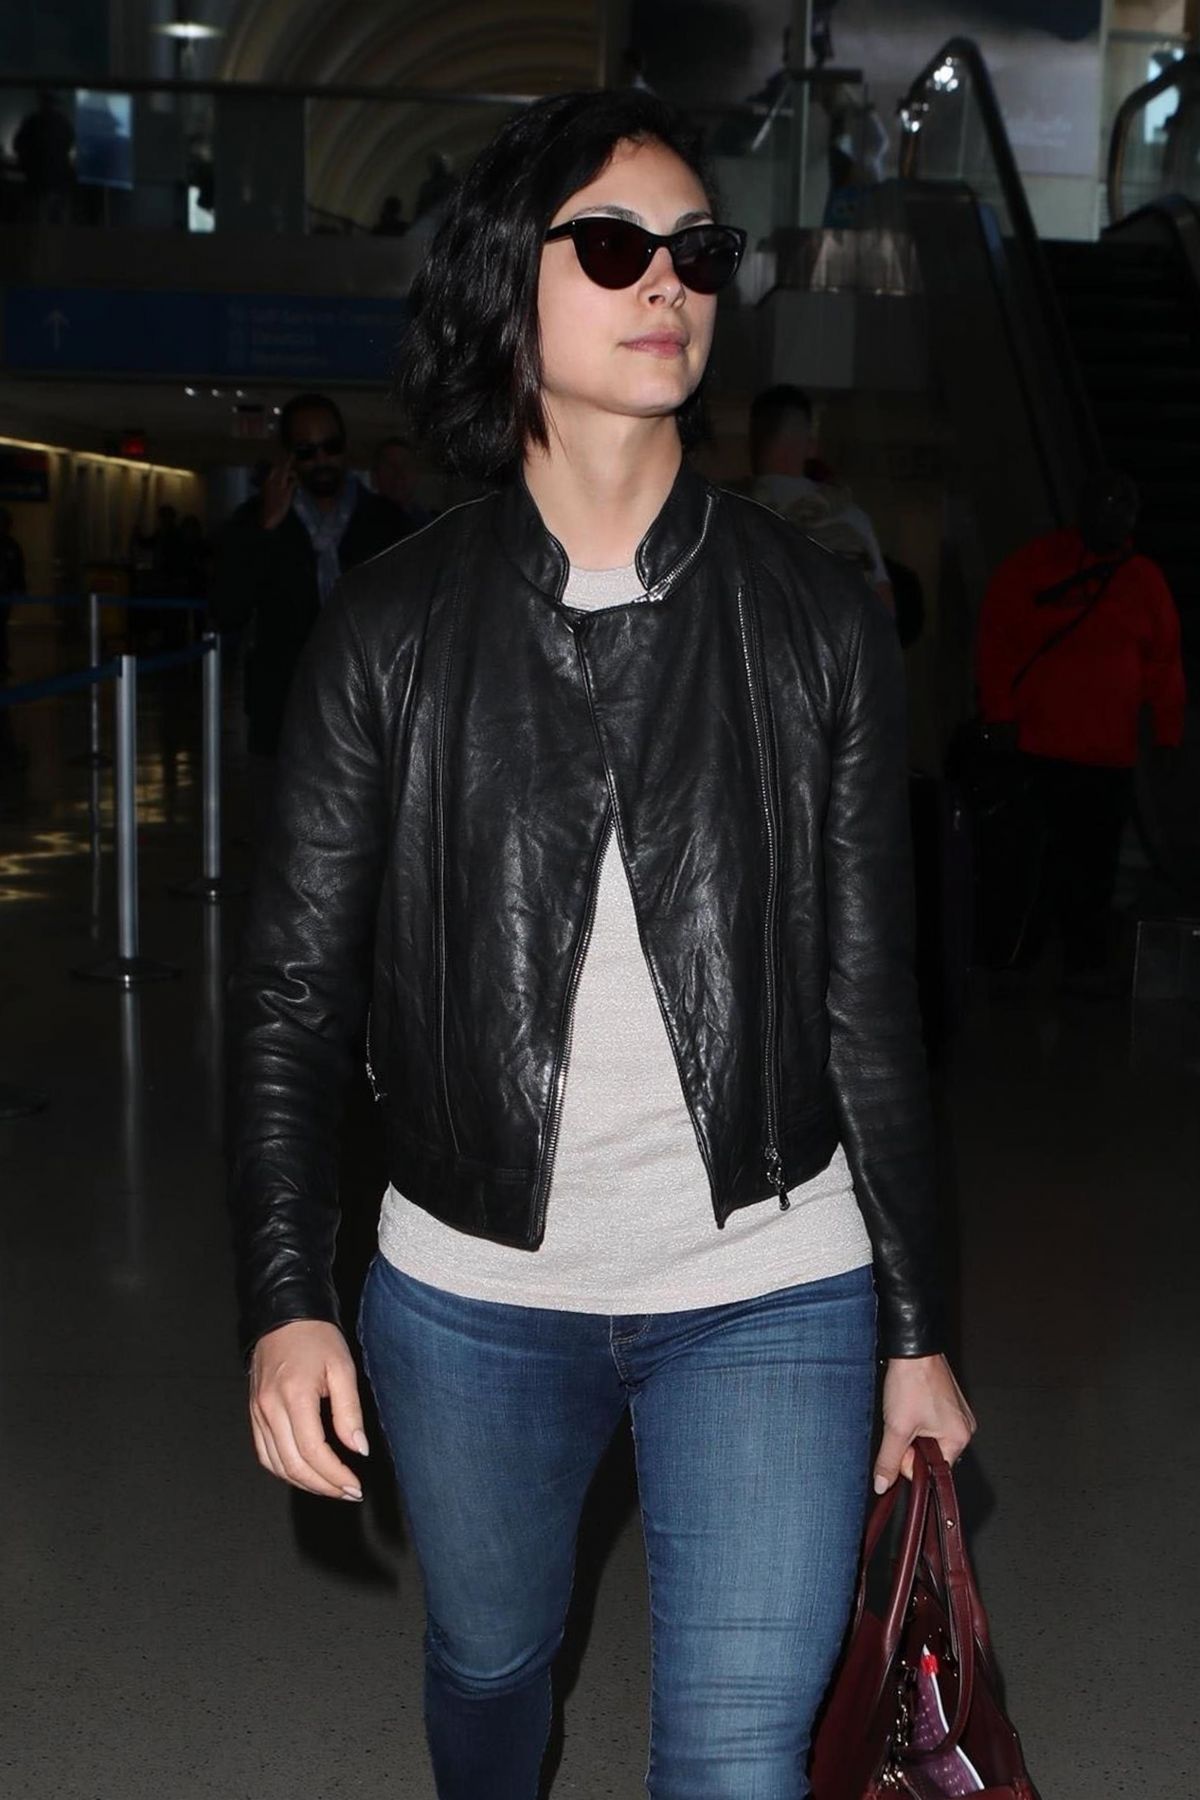 MORENA BACCARIN at LAX Airport in Los Angeles 05/17/2018 – HawtCelebs